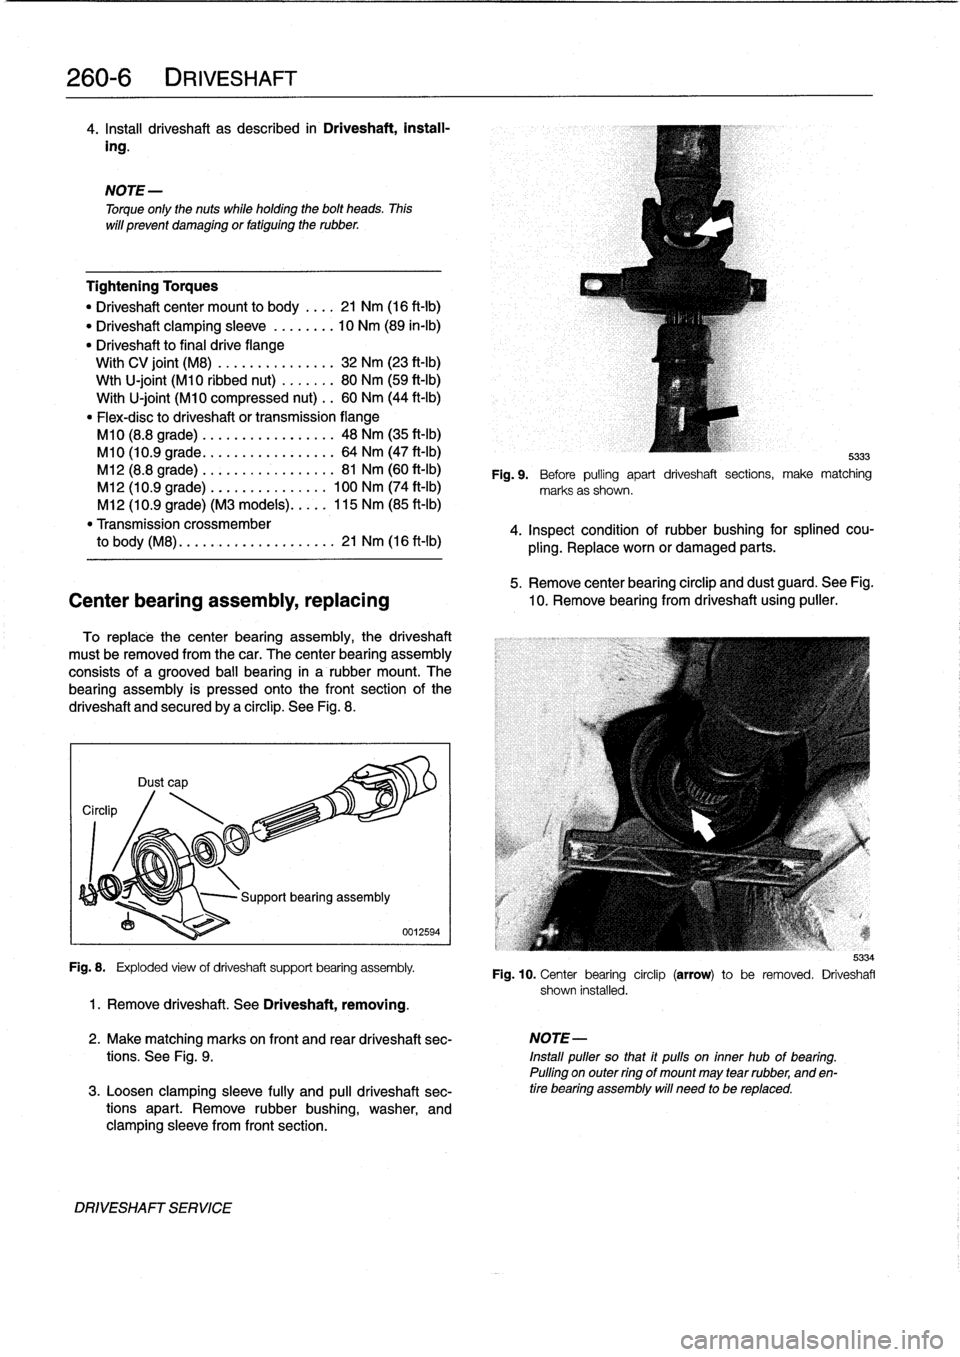 BMW 318i 1994 E36 Service Manual 
260-
6
DRIVESHAFT

4
.
Insta¡¡
driveshaft
as
described
in
Driveshaft,
install-

ing
.

Tightening
Torques

"
Driveshaft
center
mount
to
body
.
...
21
Nm
(16
ft-Ib)

"
Driveshaft
clamping
sleeve
...